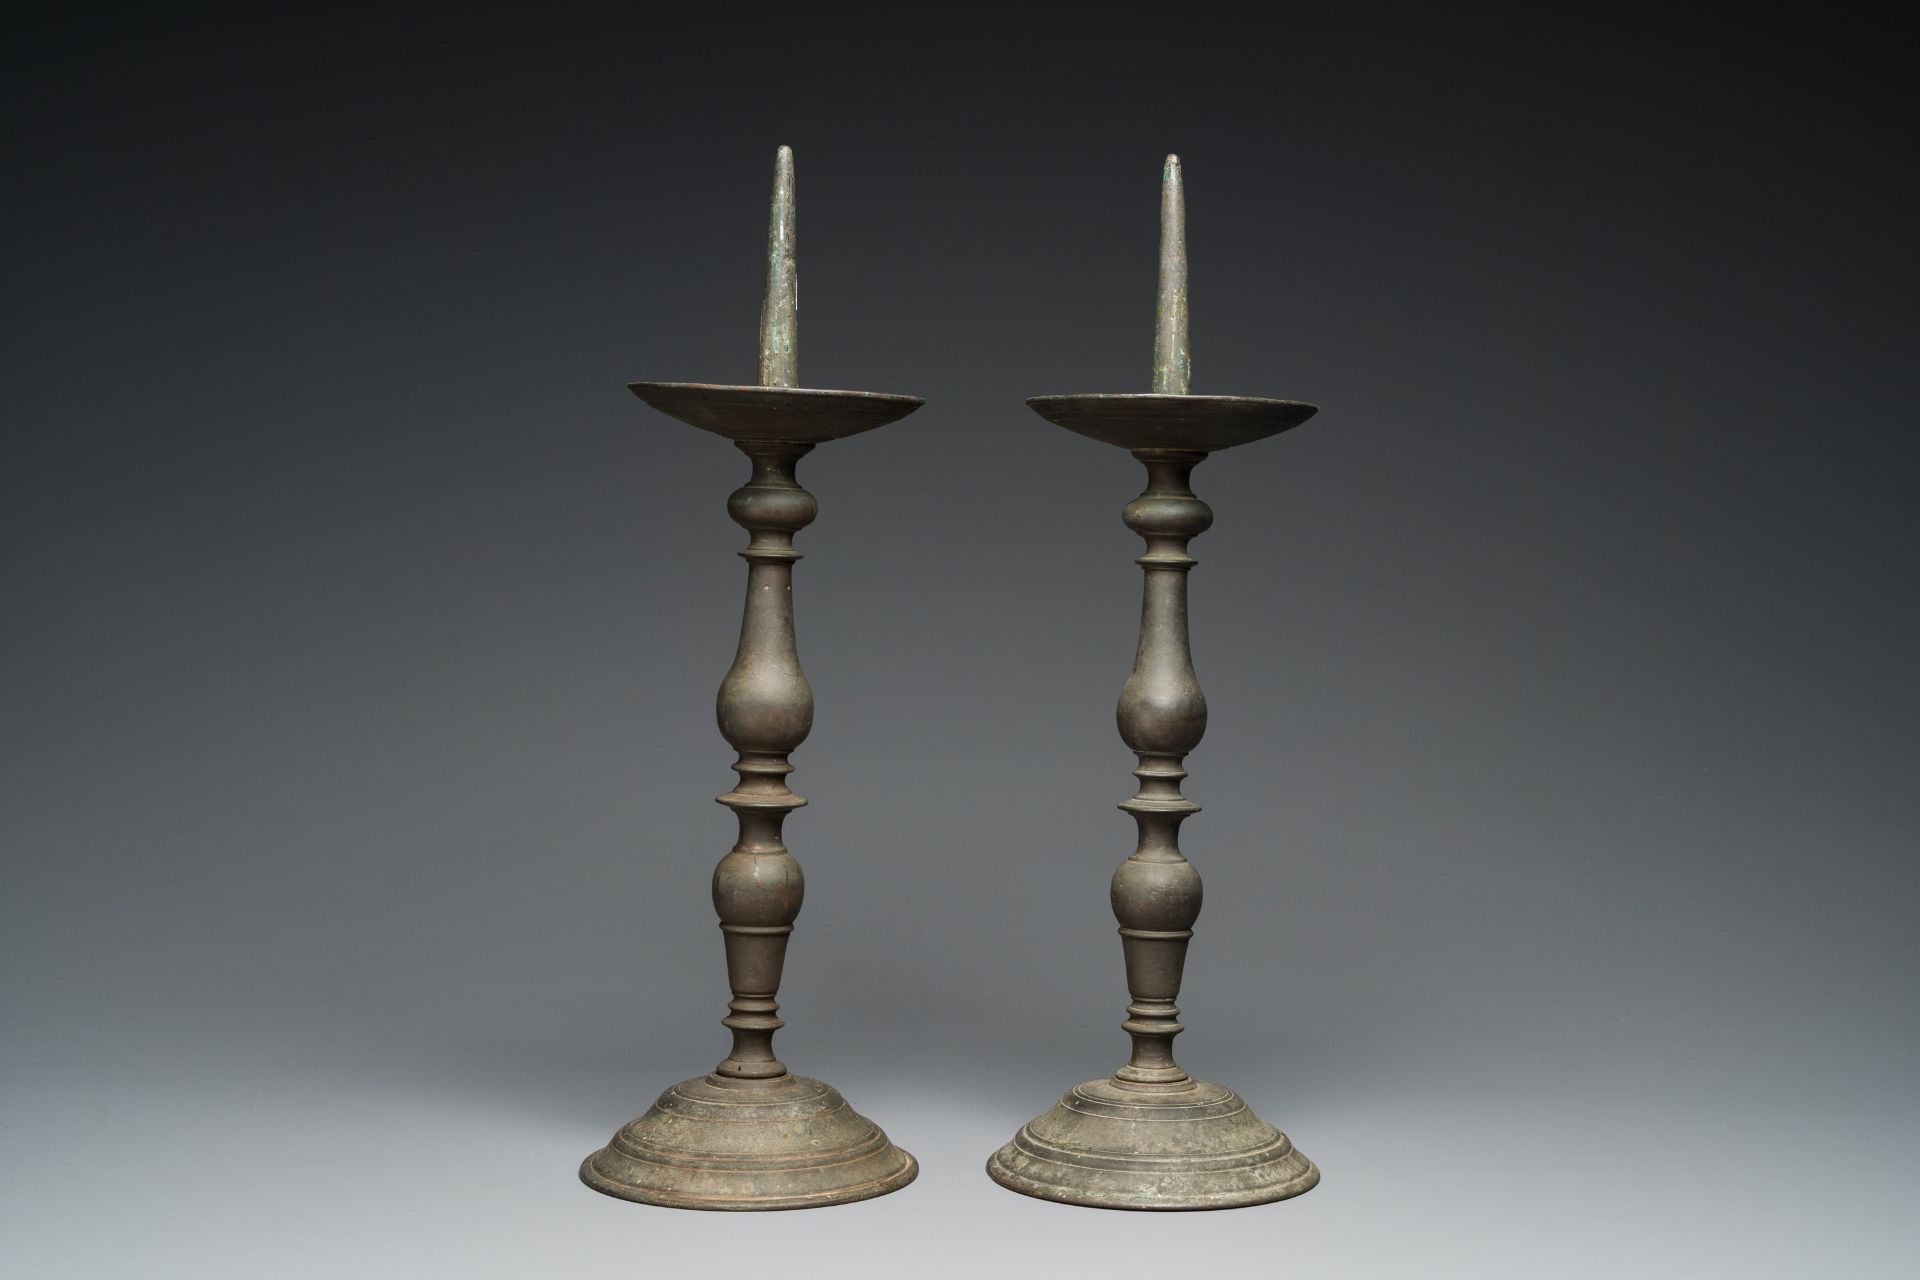 A pair of patinated bronze pricket candlesticks, France, 17th C. - Image 5 of 7